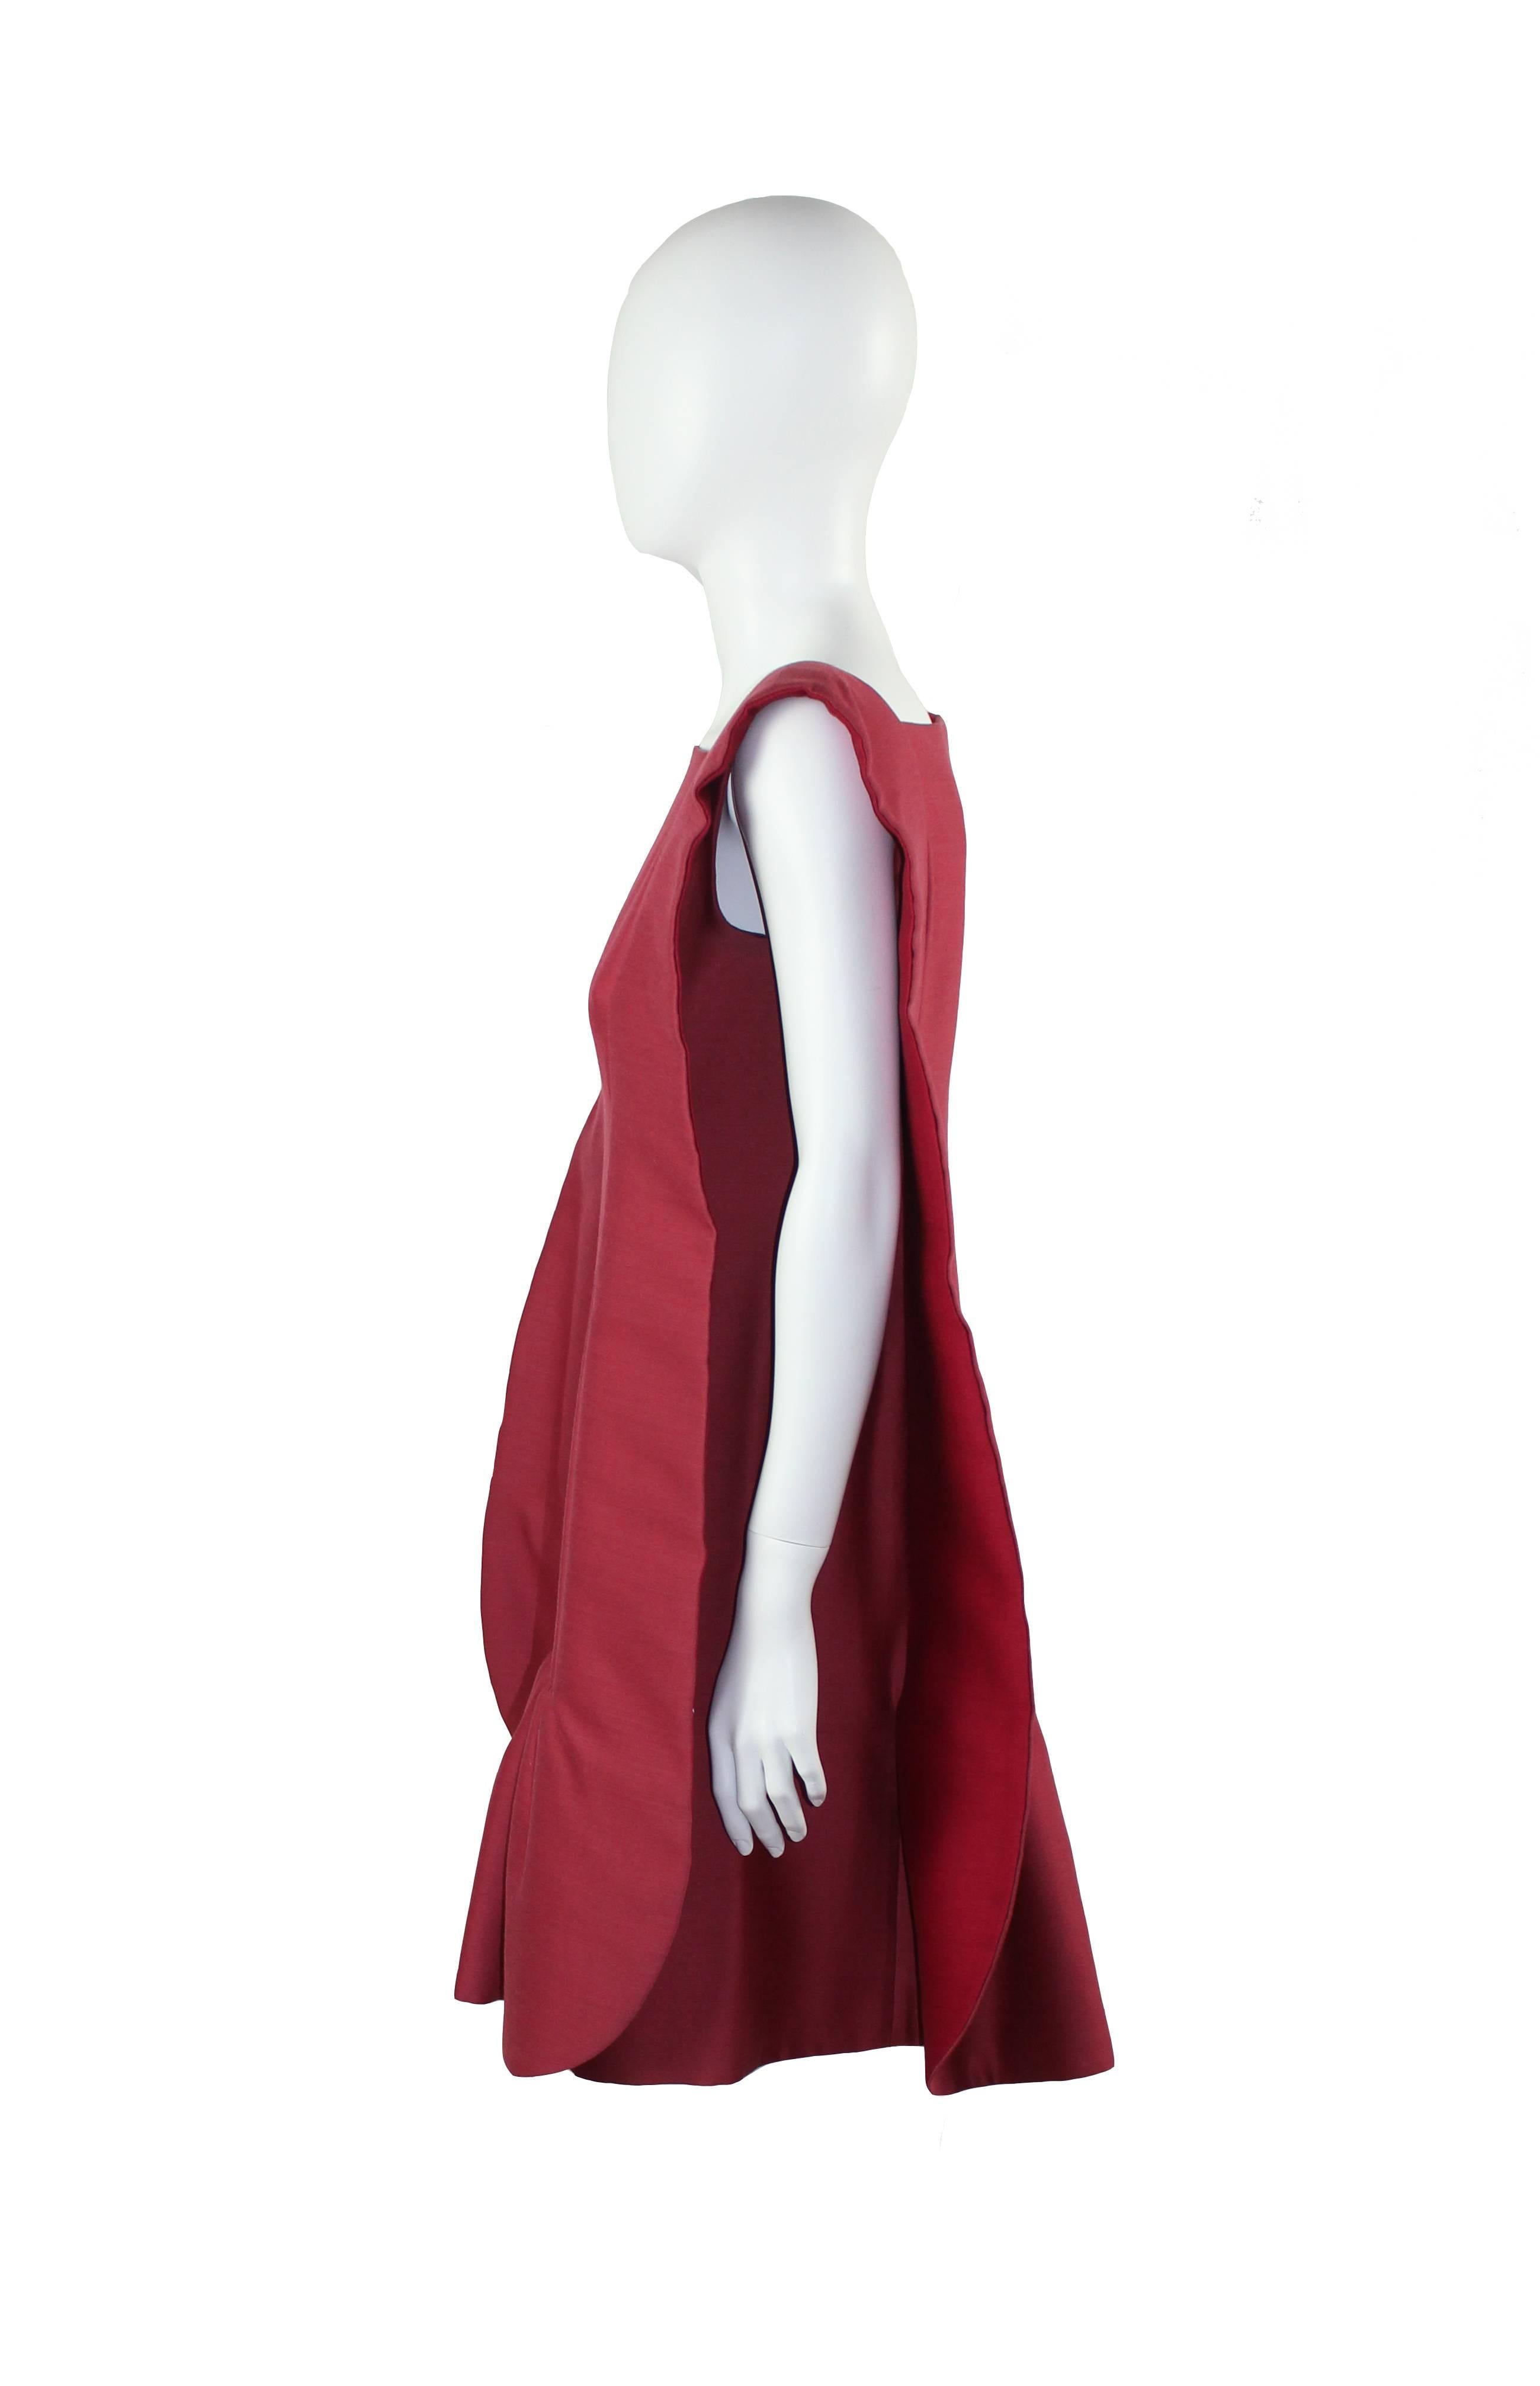 Rare Roberto Capucci couture raspberry pink wool/silk fabric dress, sculptured side panels. Hidden side zip.
Mid 80s.
Bust: 92 cm
Perfect condition
